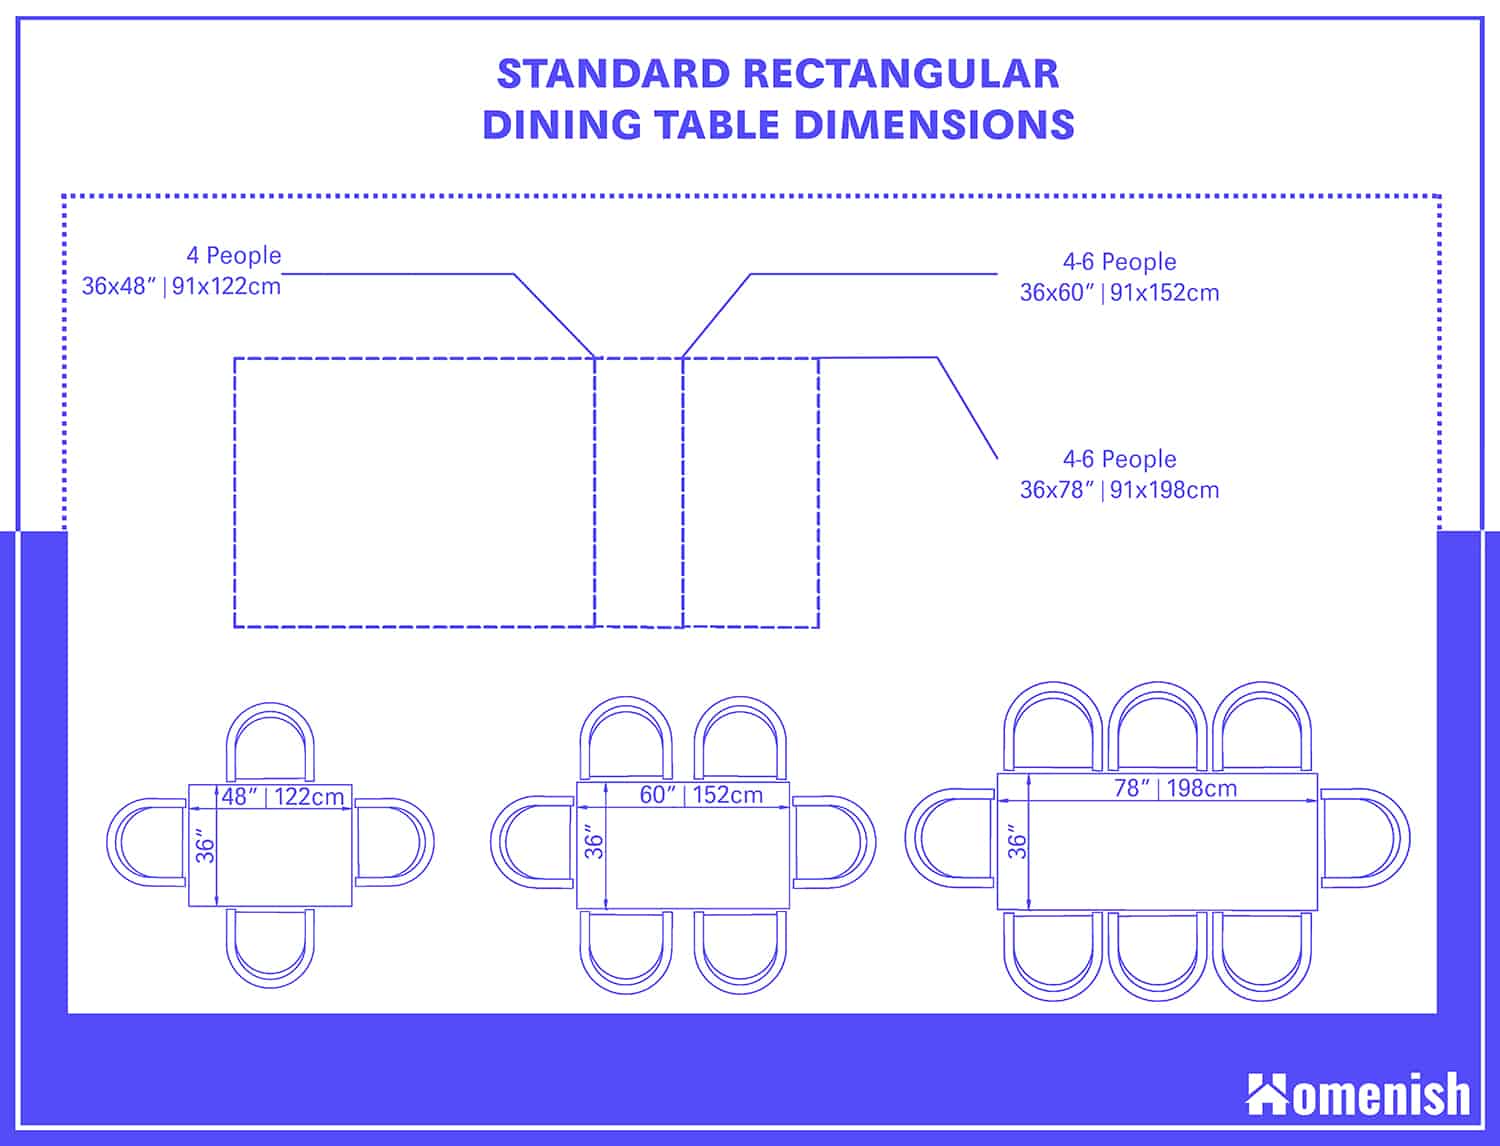 Standard Rectangular Dining Table Dimensions